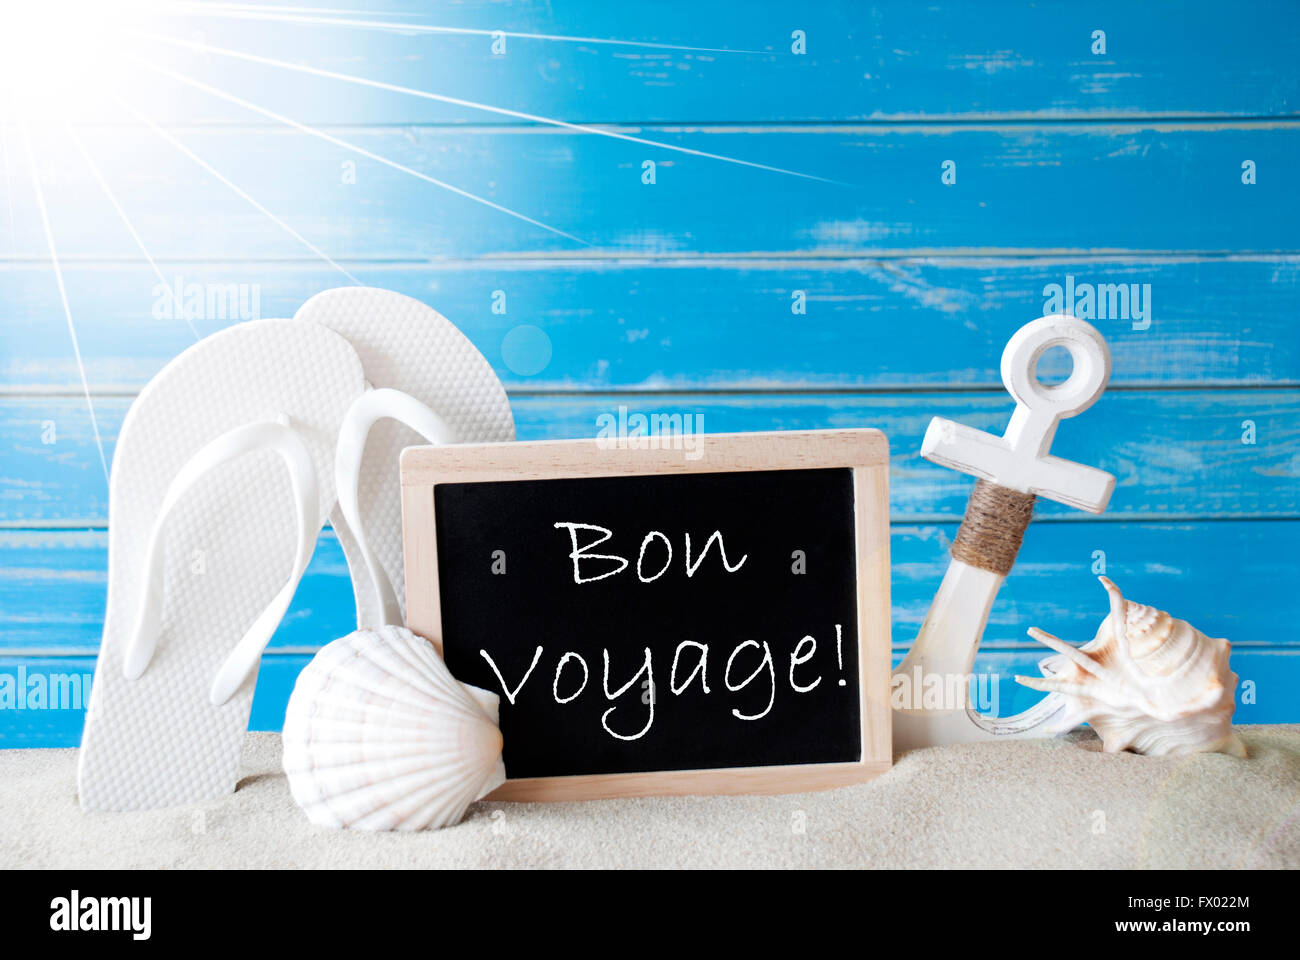 Sunny Summer Card With Bon Voyage Means Good Trip Stock Photo